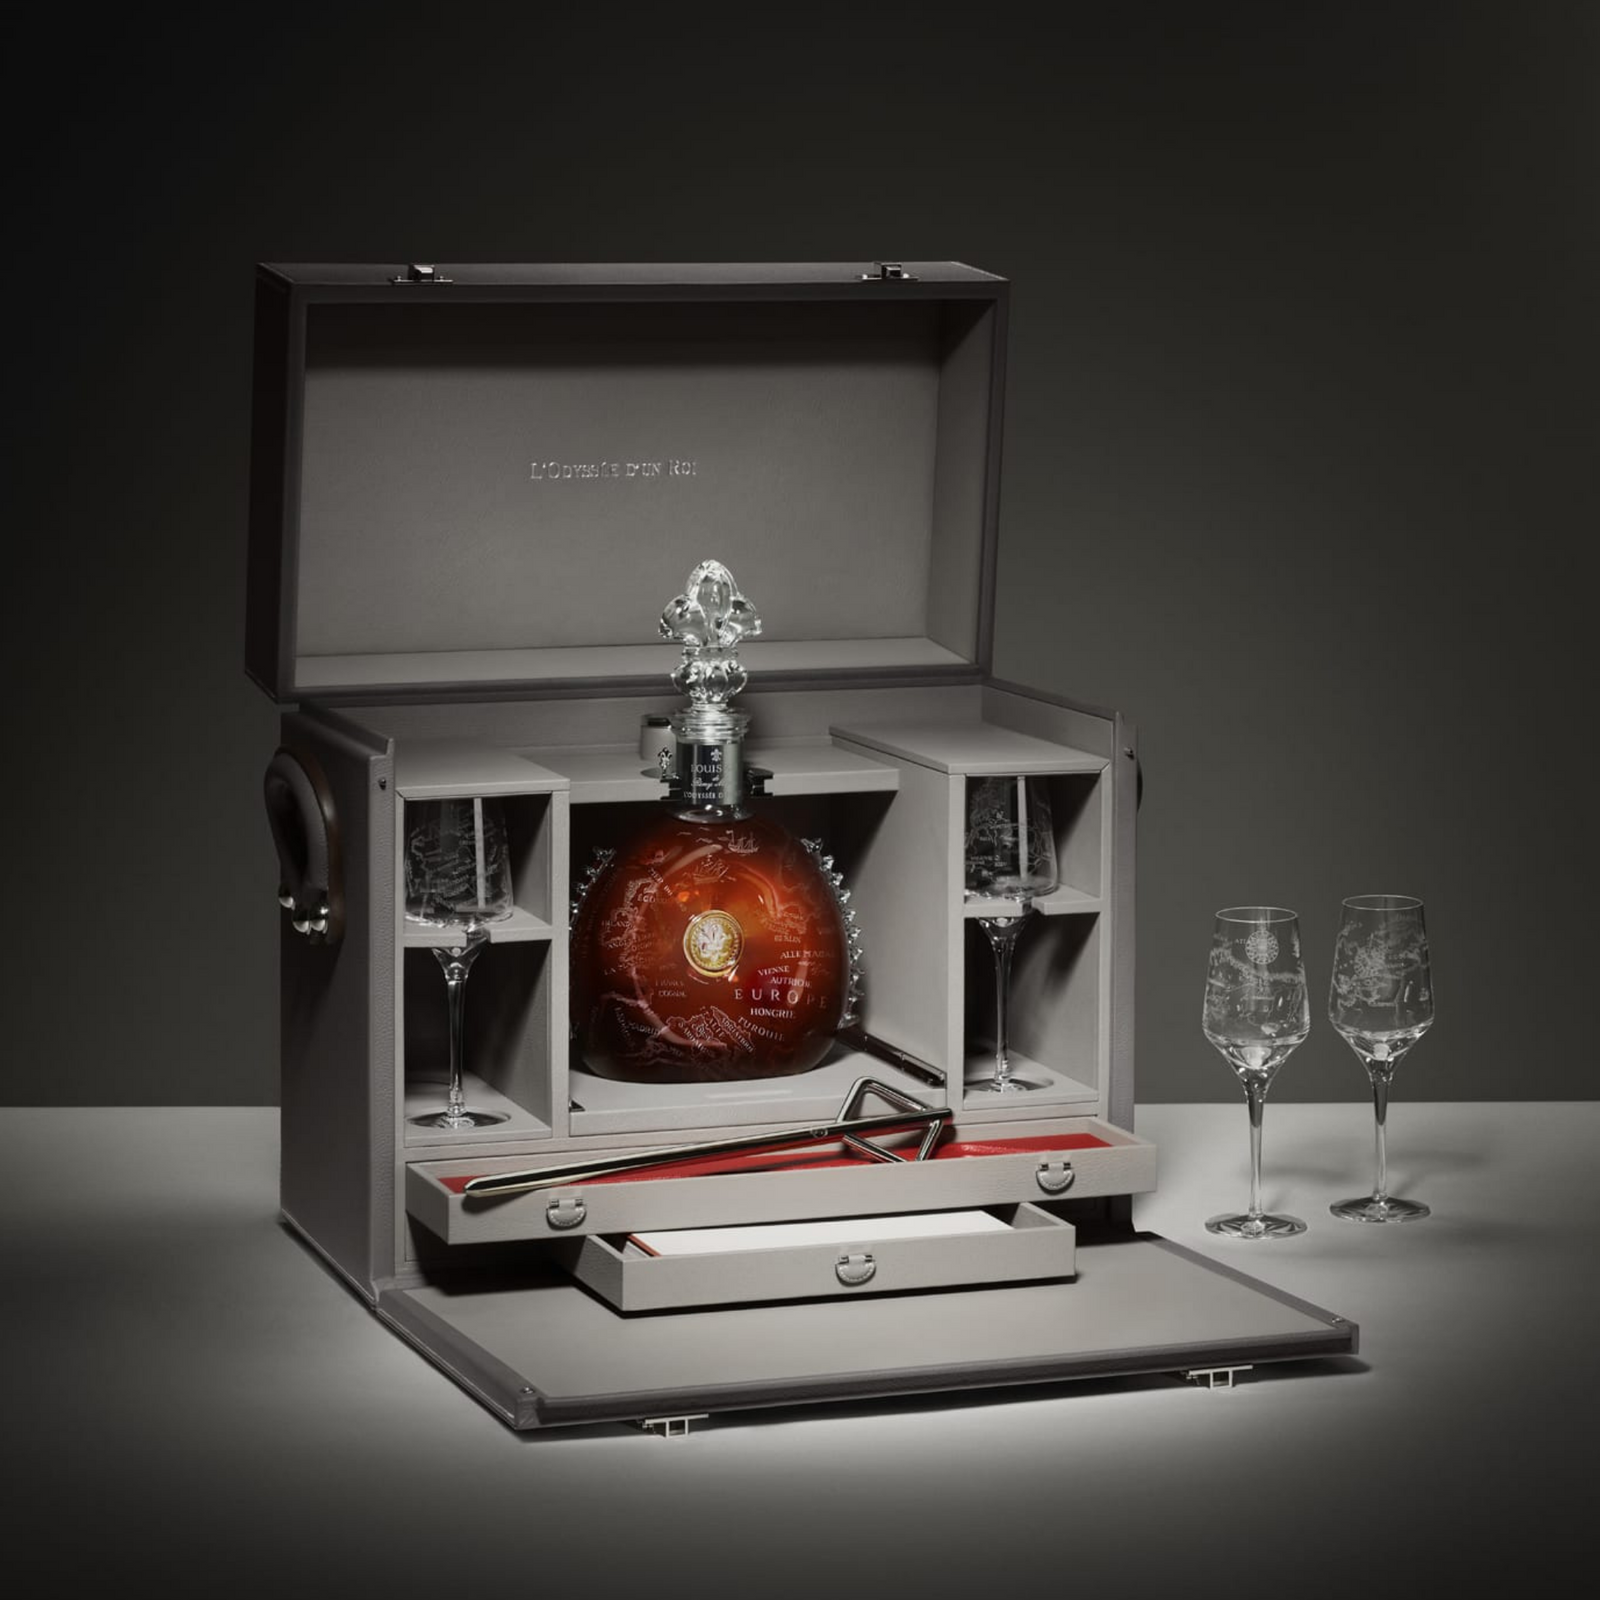 A lifestyle photo of LOUIS XIII L'Odyssee d'un Roi decanter in its box with two cristal glases in the box, a spear on the box drawer and two other crystal glasses nearby. Grey background